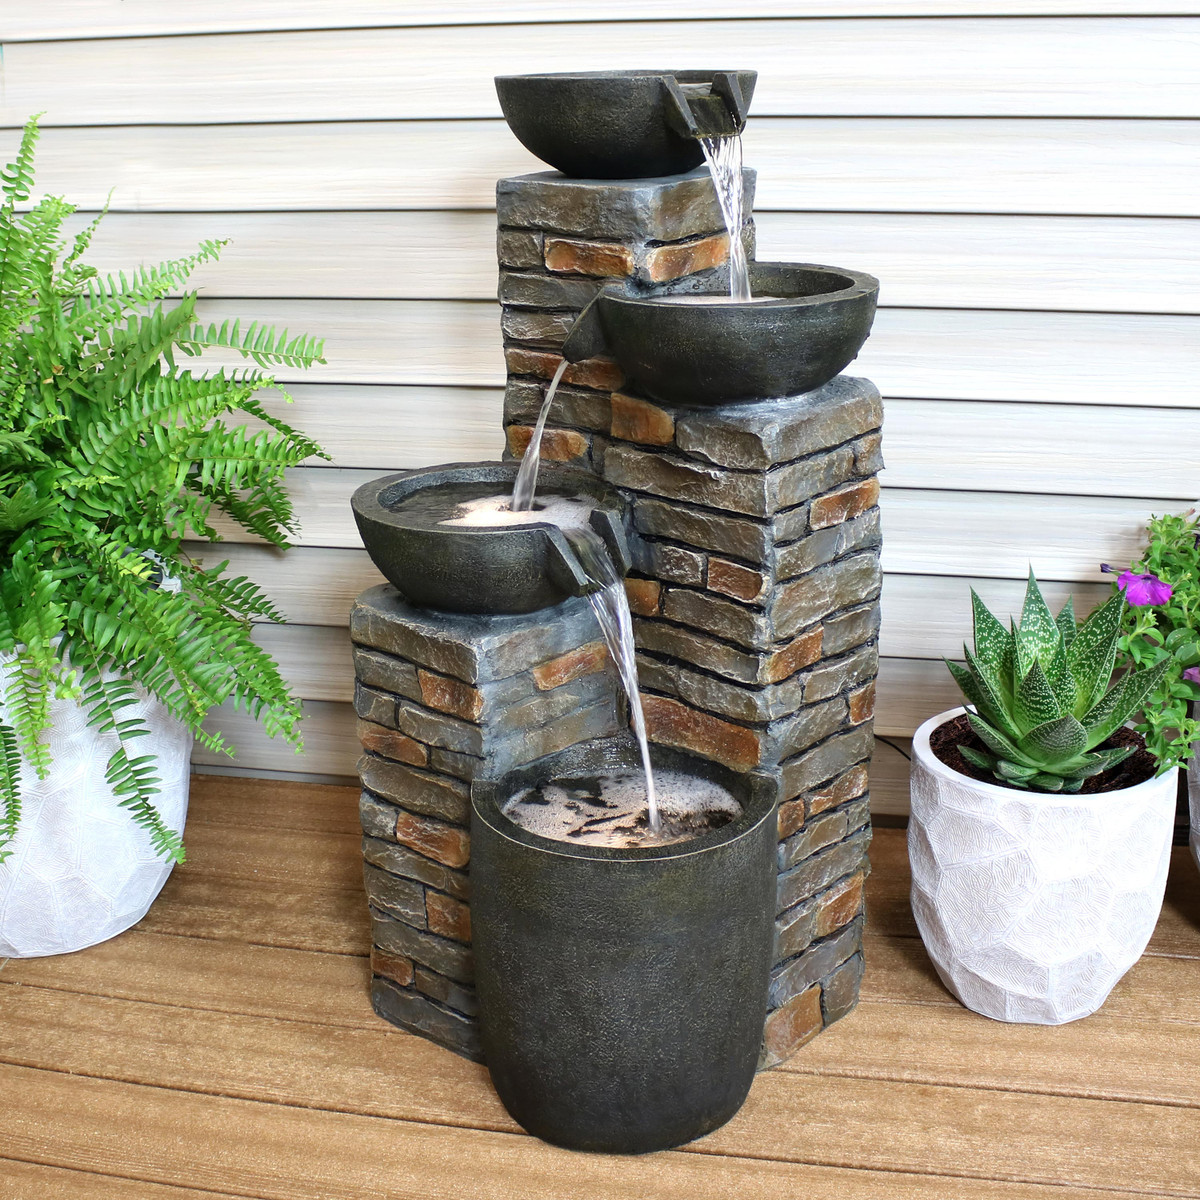 babbling bowl fountain rainbow sandstone large stone water features on outdoor water fountain bowls